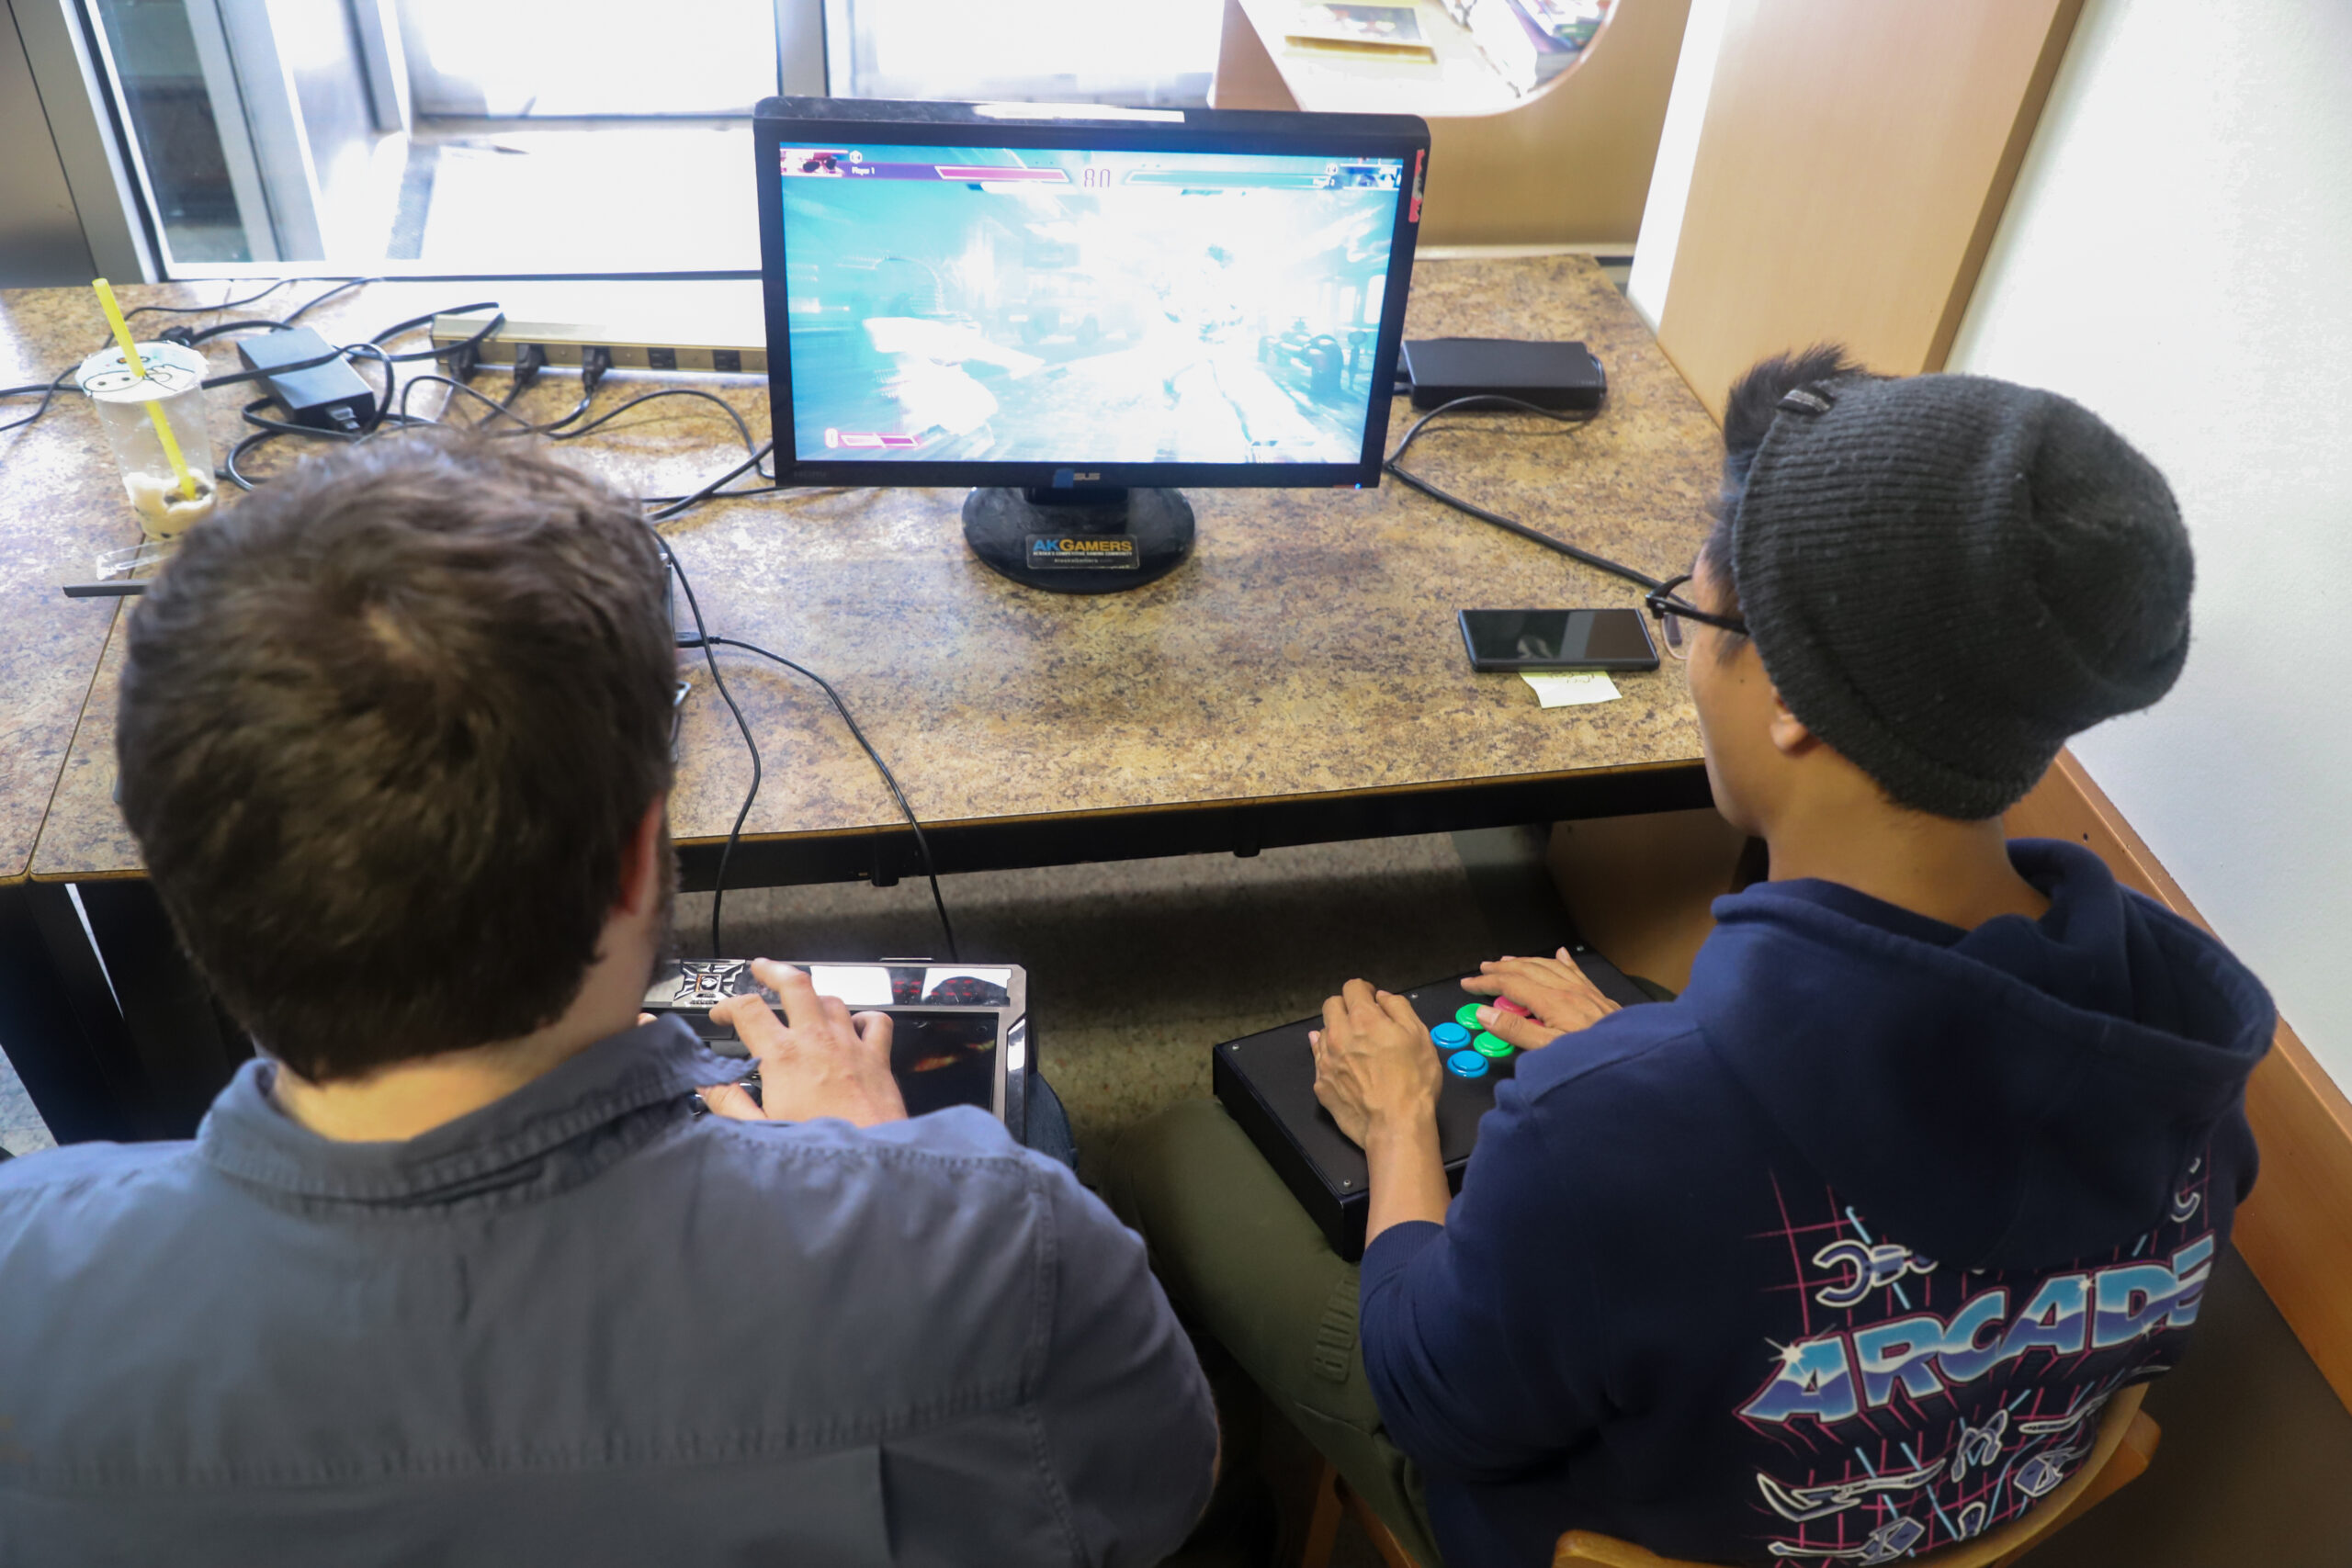 Two people sit at a table and play a video game. They have boxy controllers with buttons and levers on their laps.